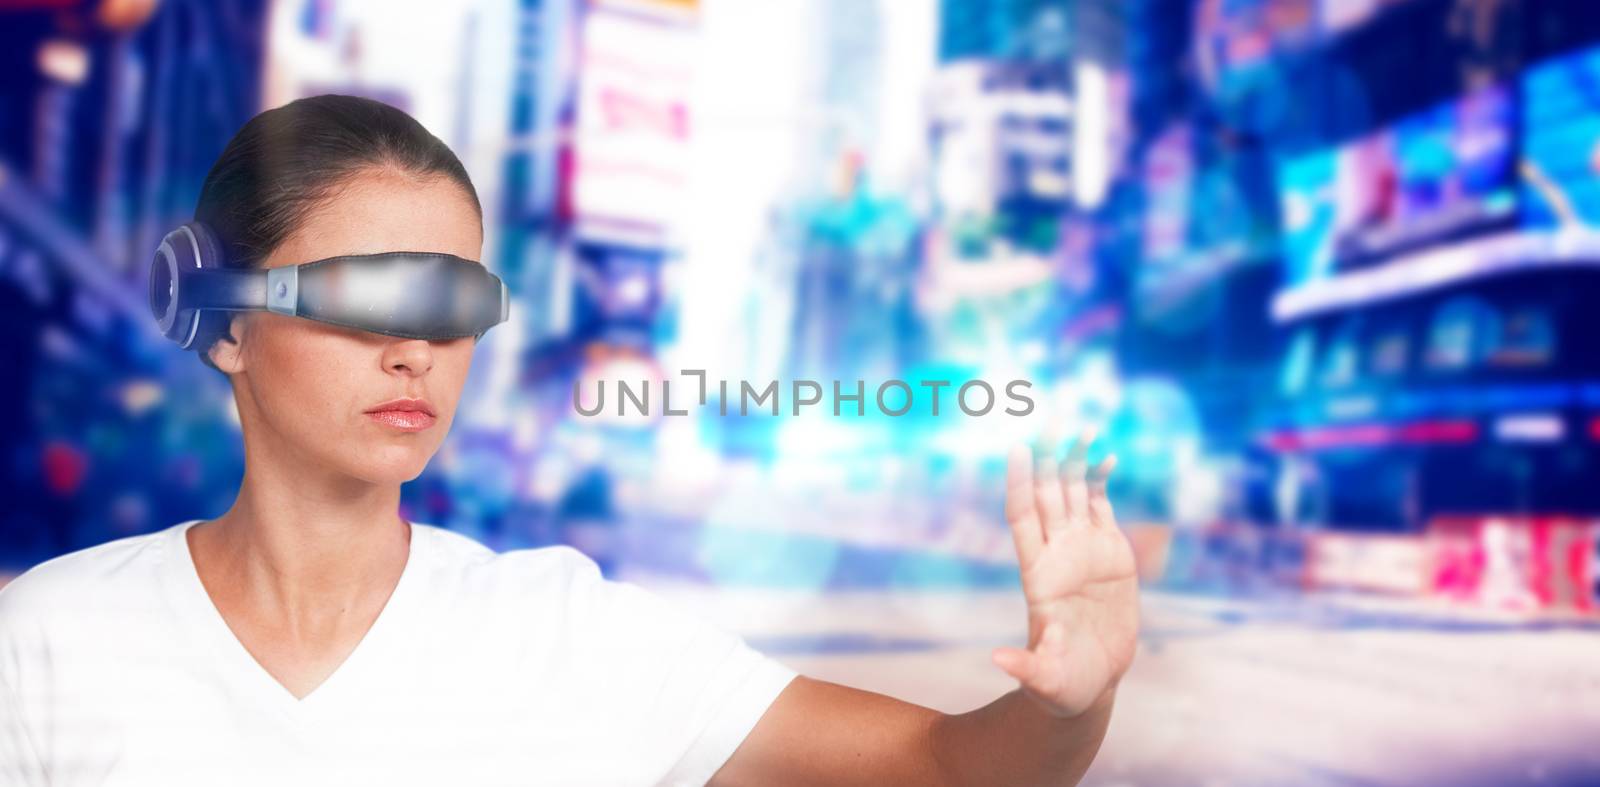 Beautiful woman gesturing while using virtual video glasses against blurry new york street